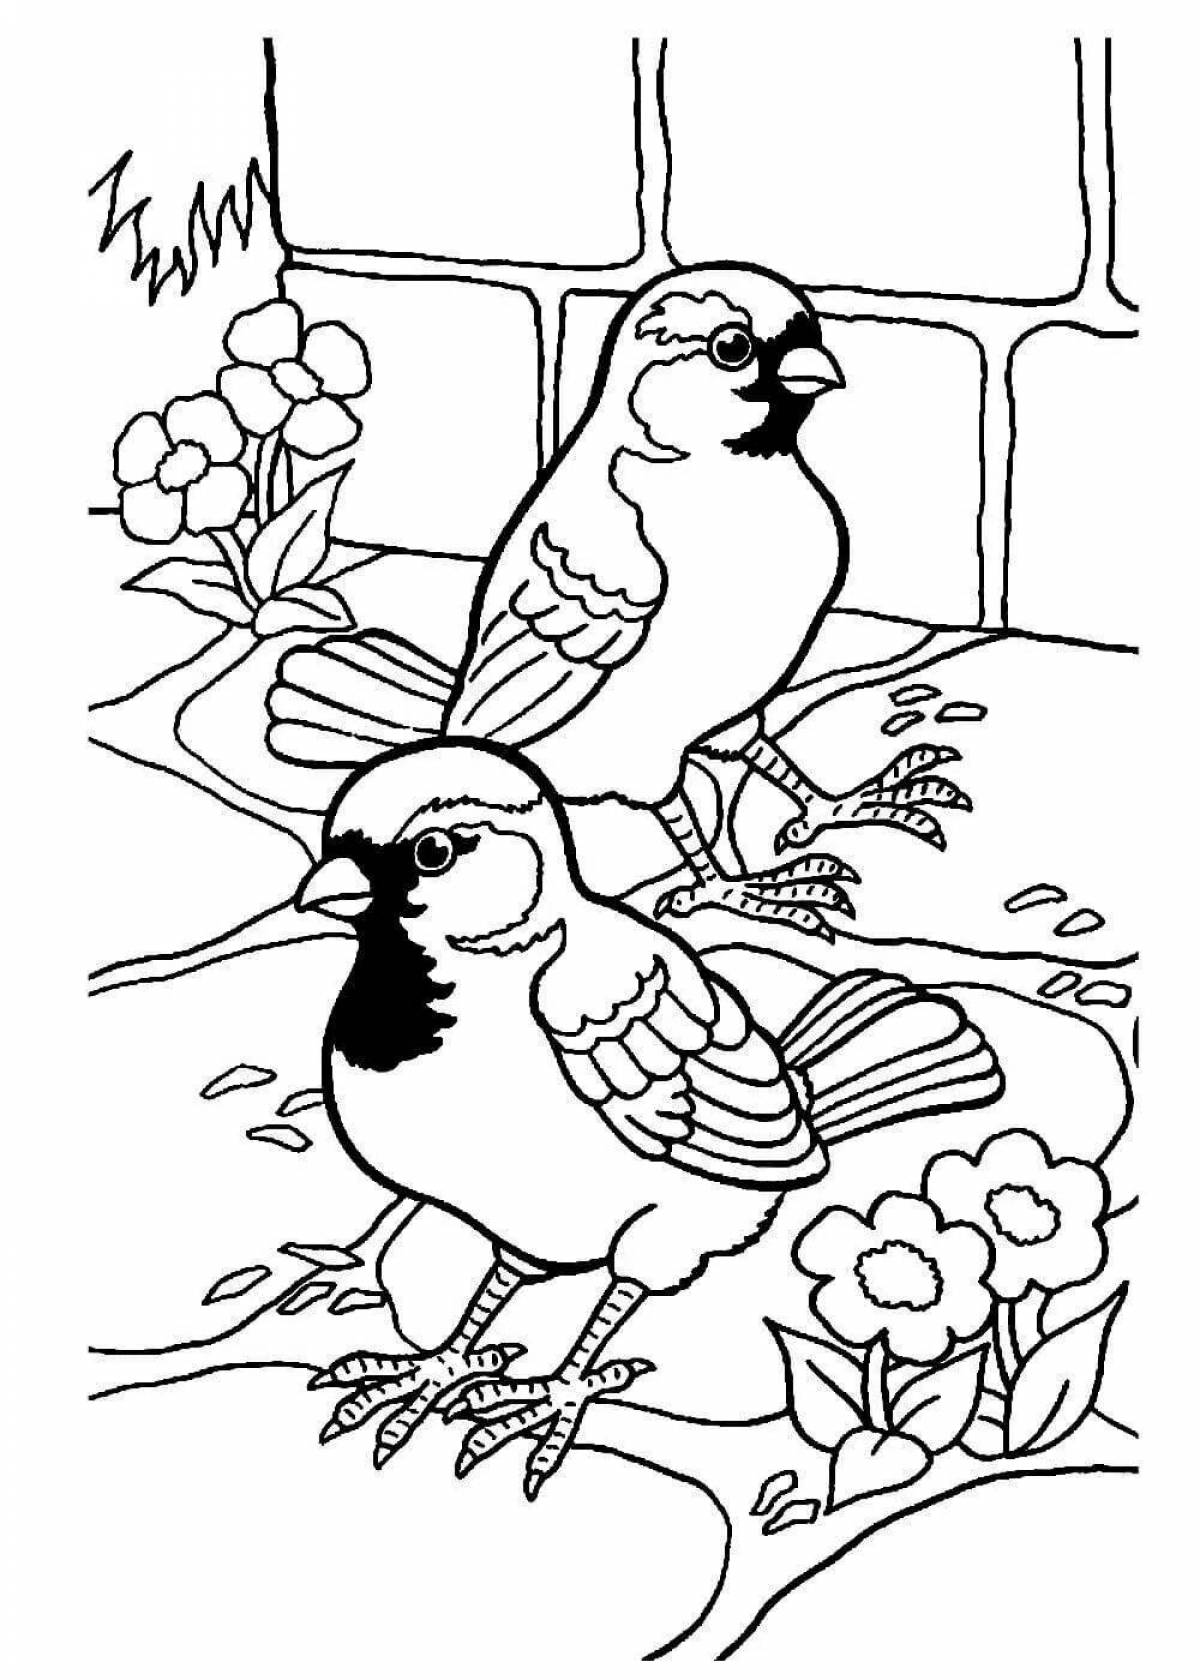 Colorful sparrow in winter coloring book